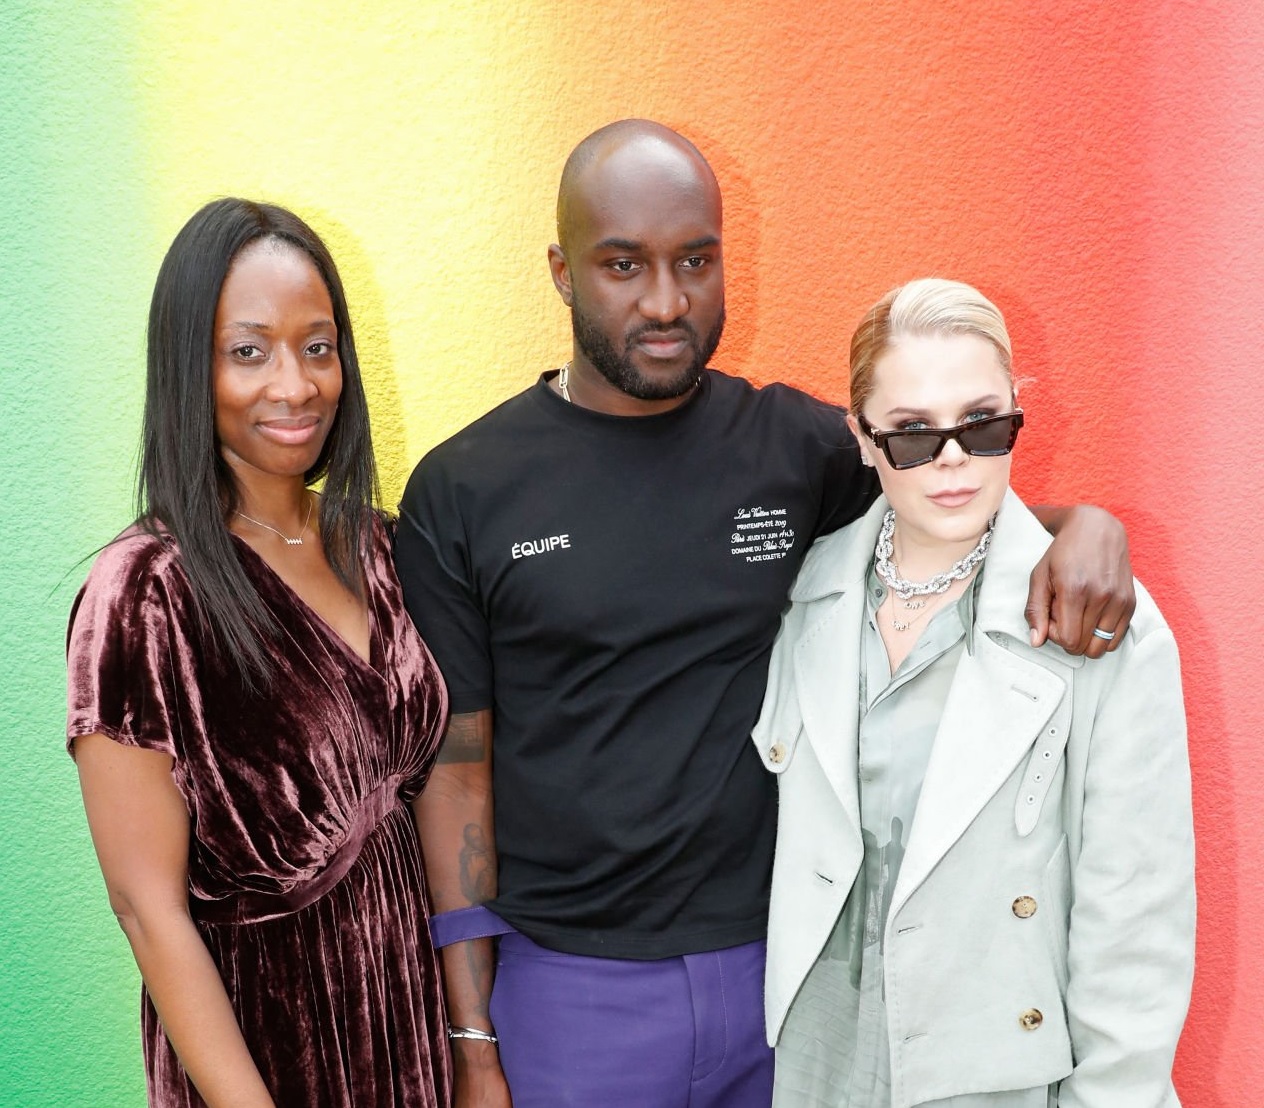 Virgil Abloh pictured with his wife Shannon Abloh (R) and his sister after the Louis Vuitton Menswear Spring/Summer 2019 show 